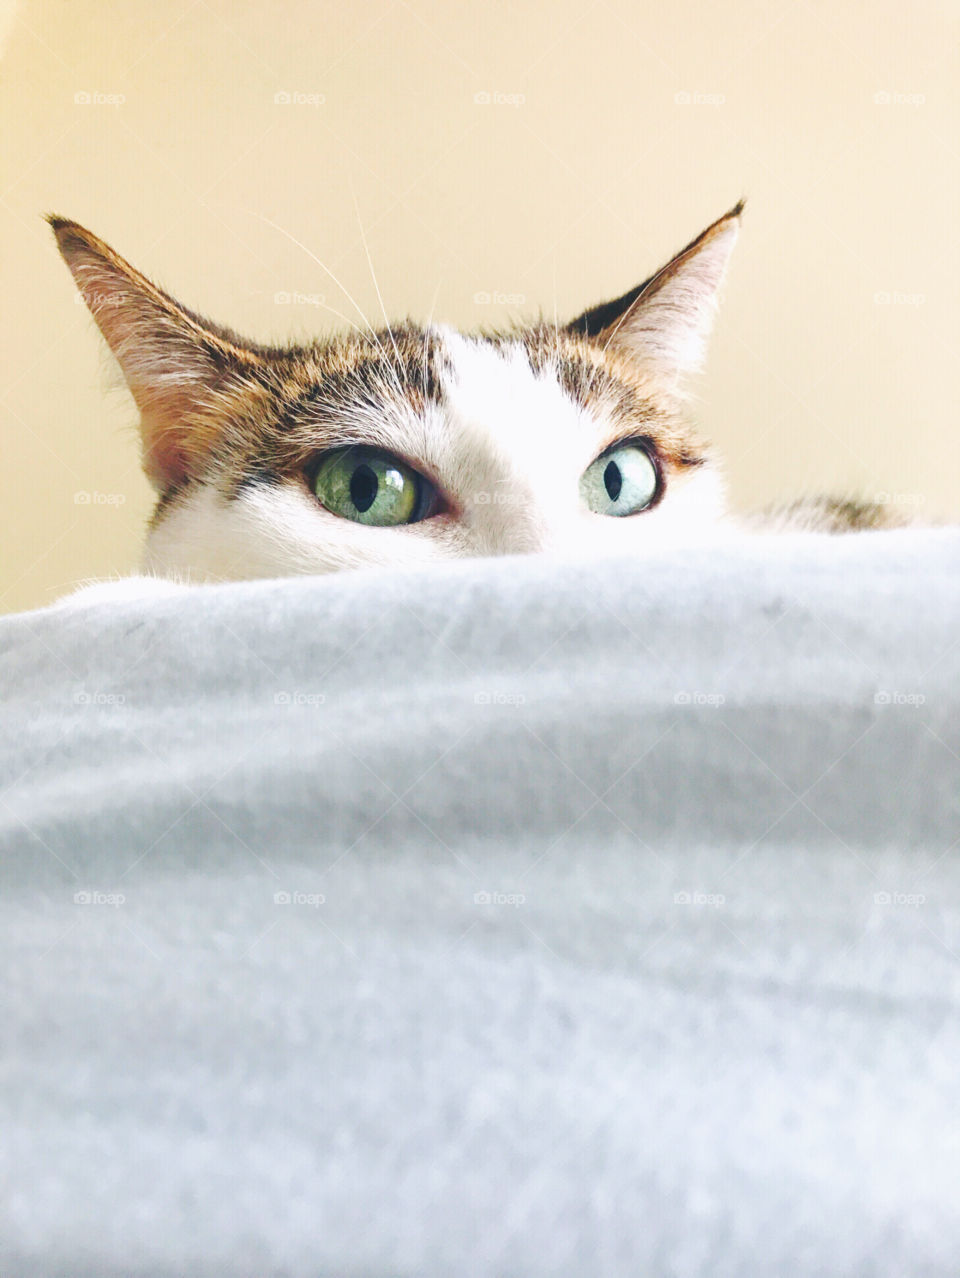 Kitty cat peeks at you over the bed